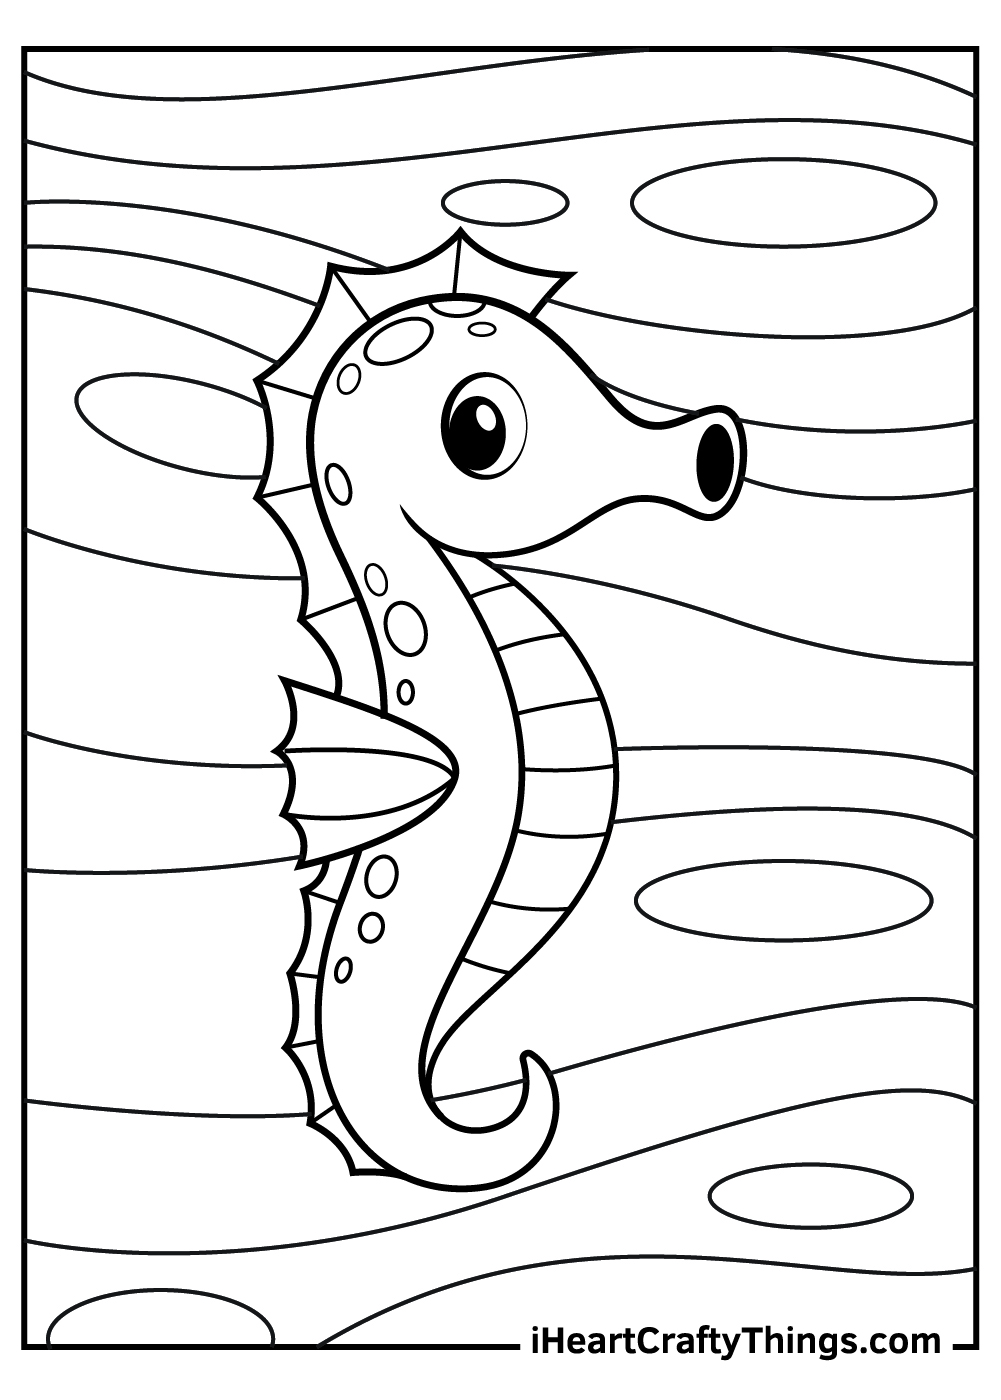 Seahorse coloring pages free printables